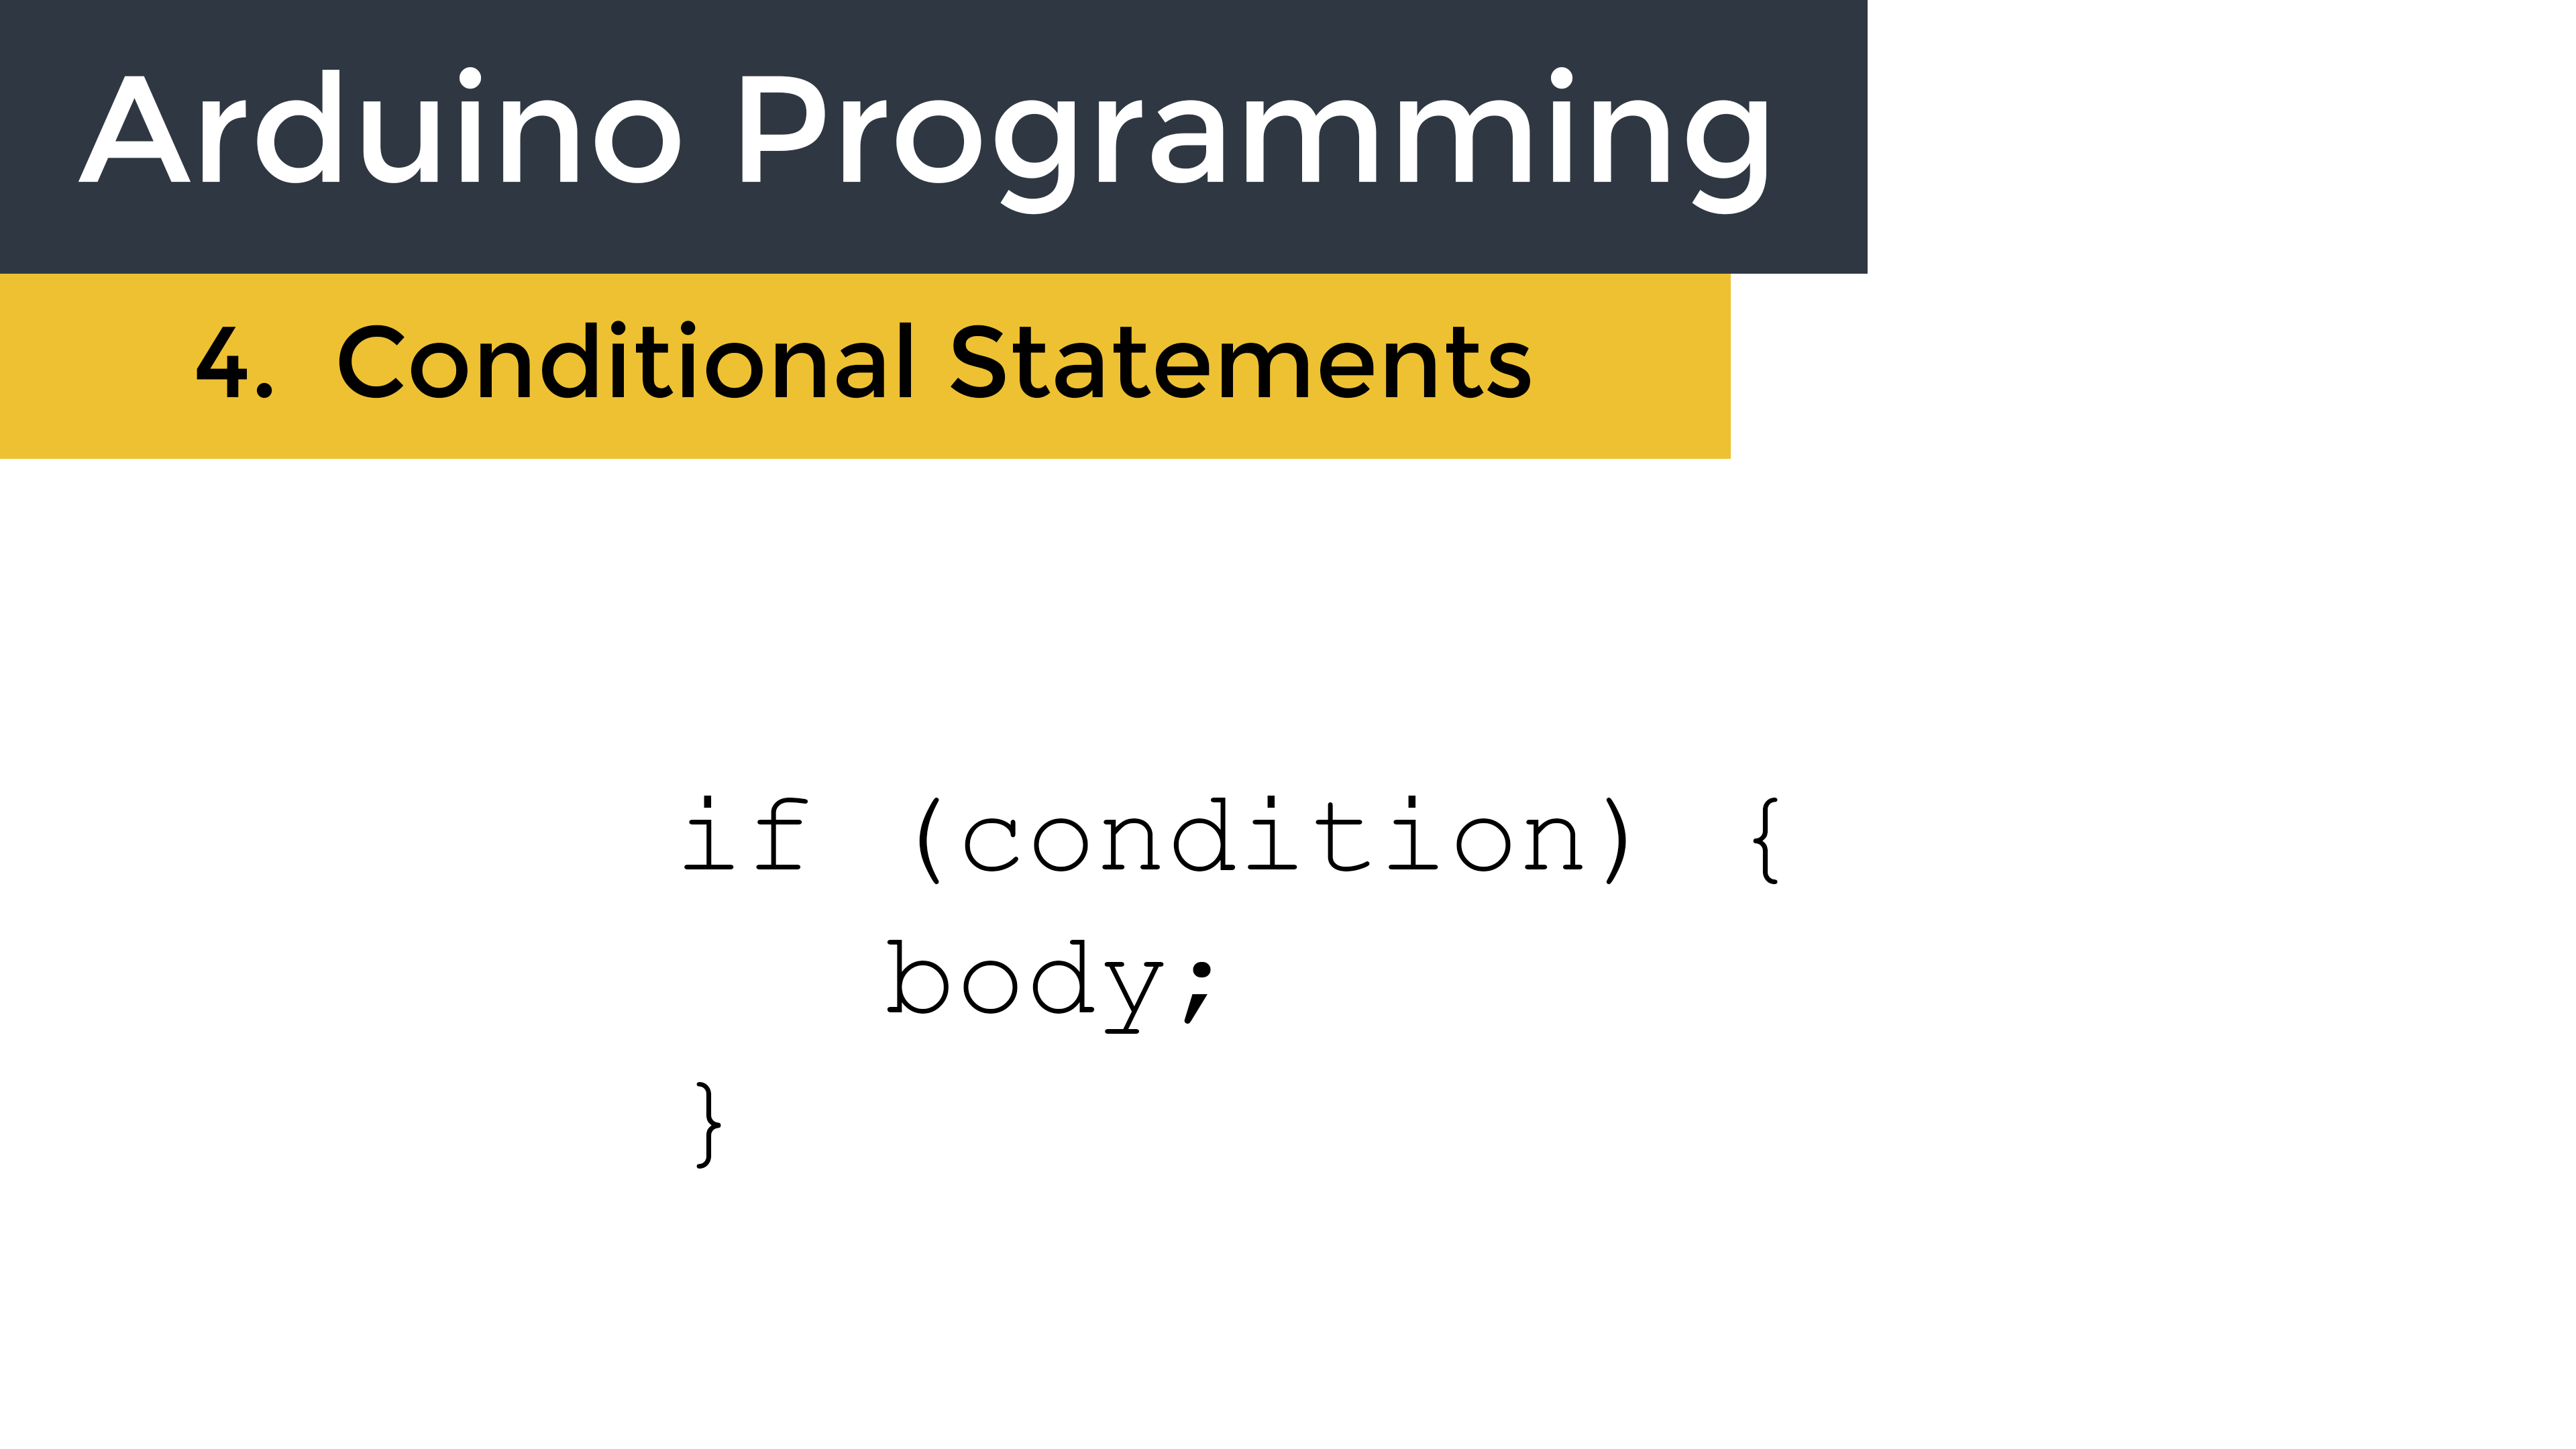 How to Use Conditional Statements in Arduino Programming